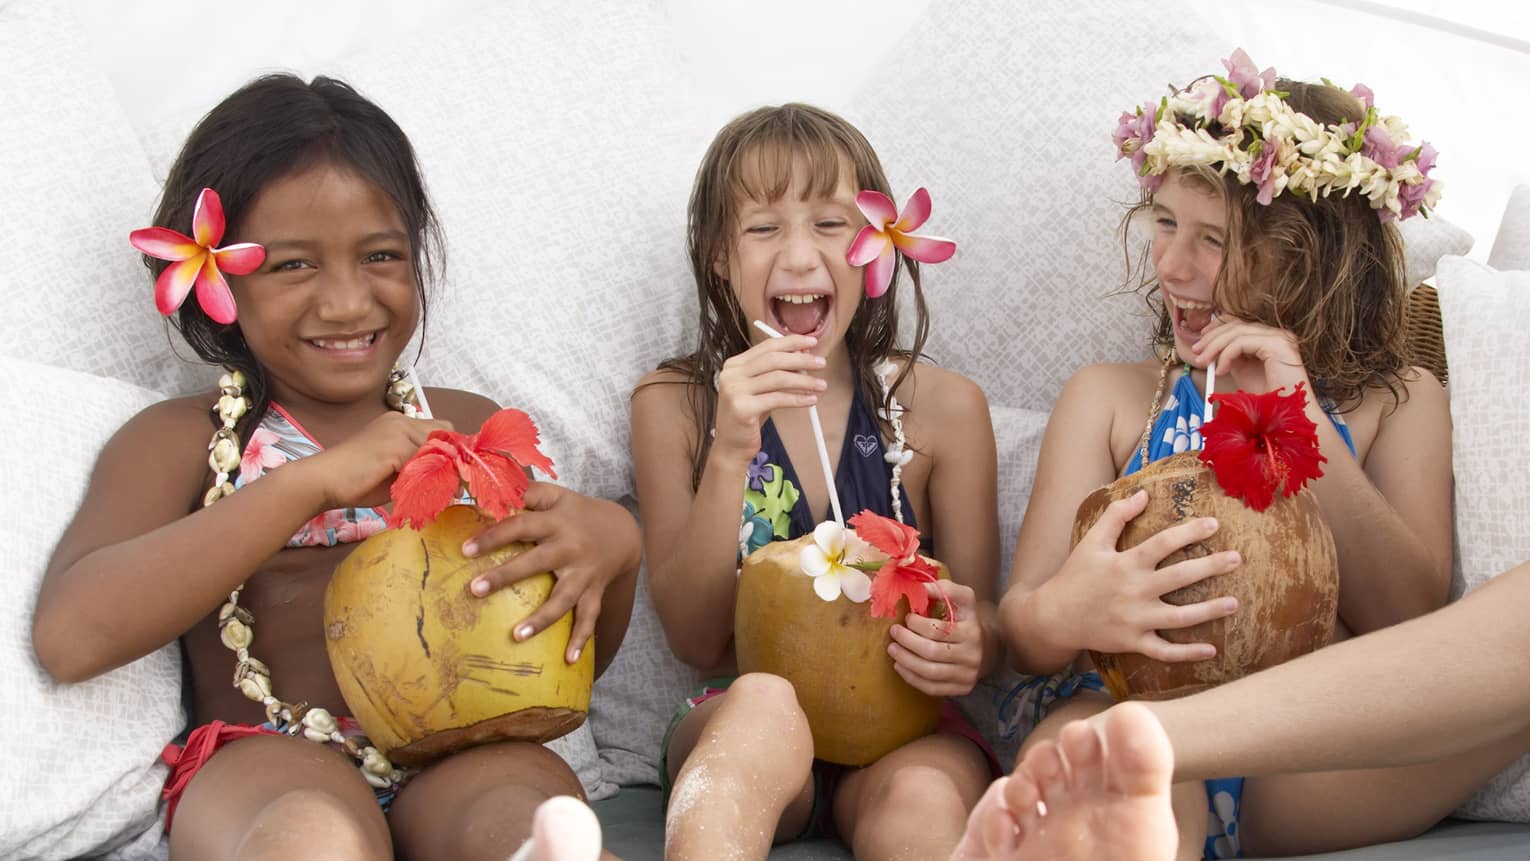 Three young girls laughing with tropical drinks, tropical flowers in their hair